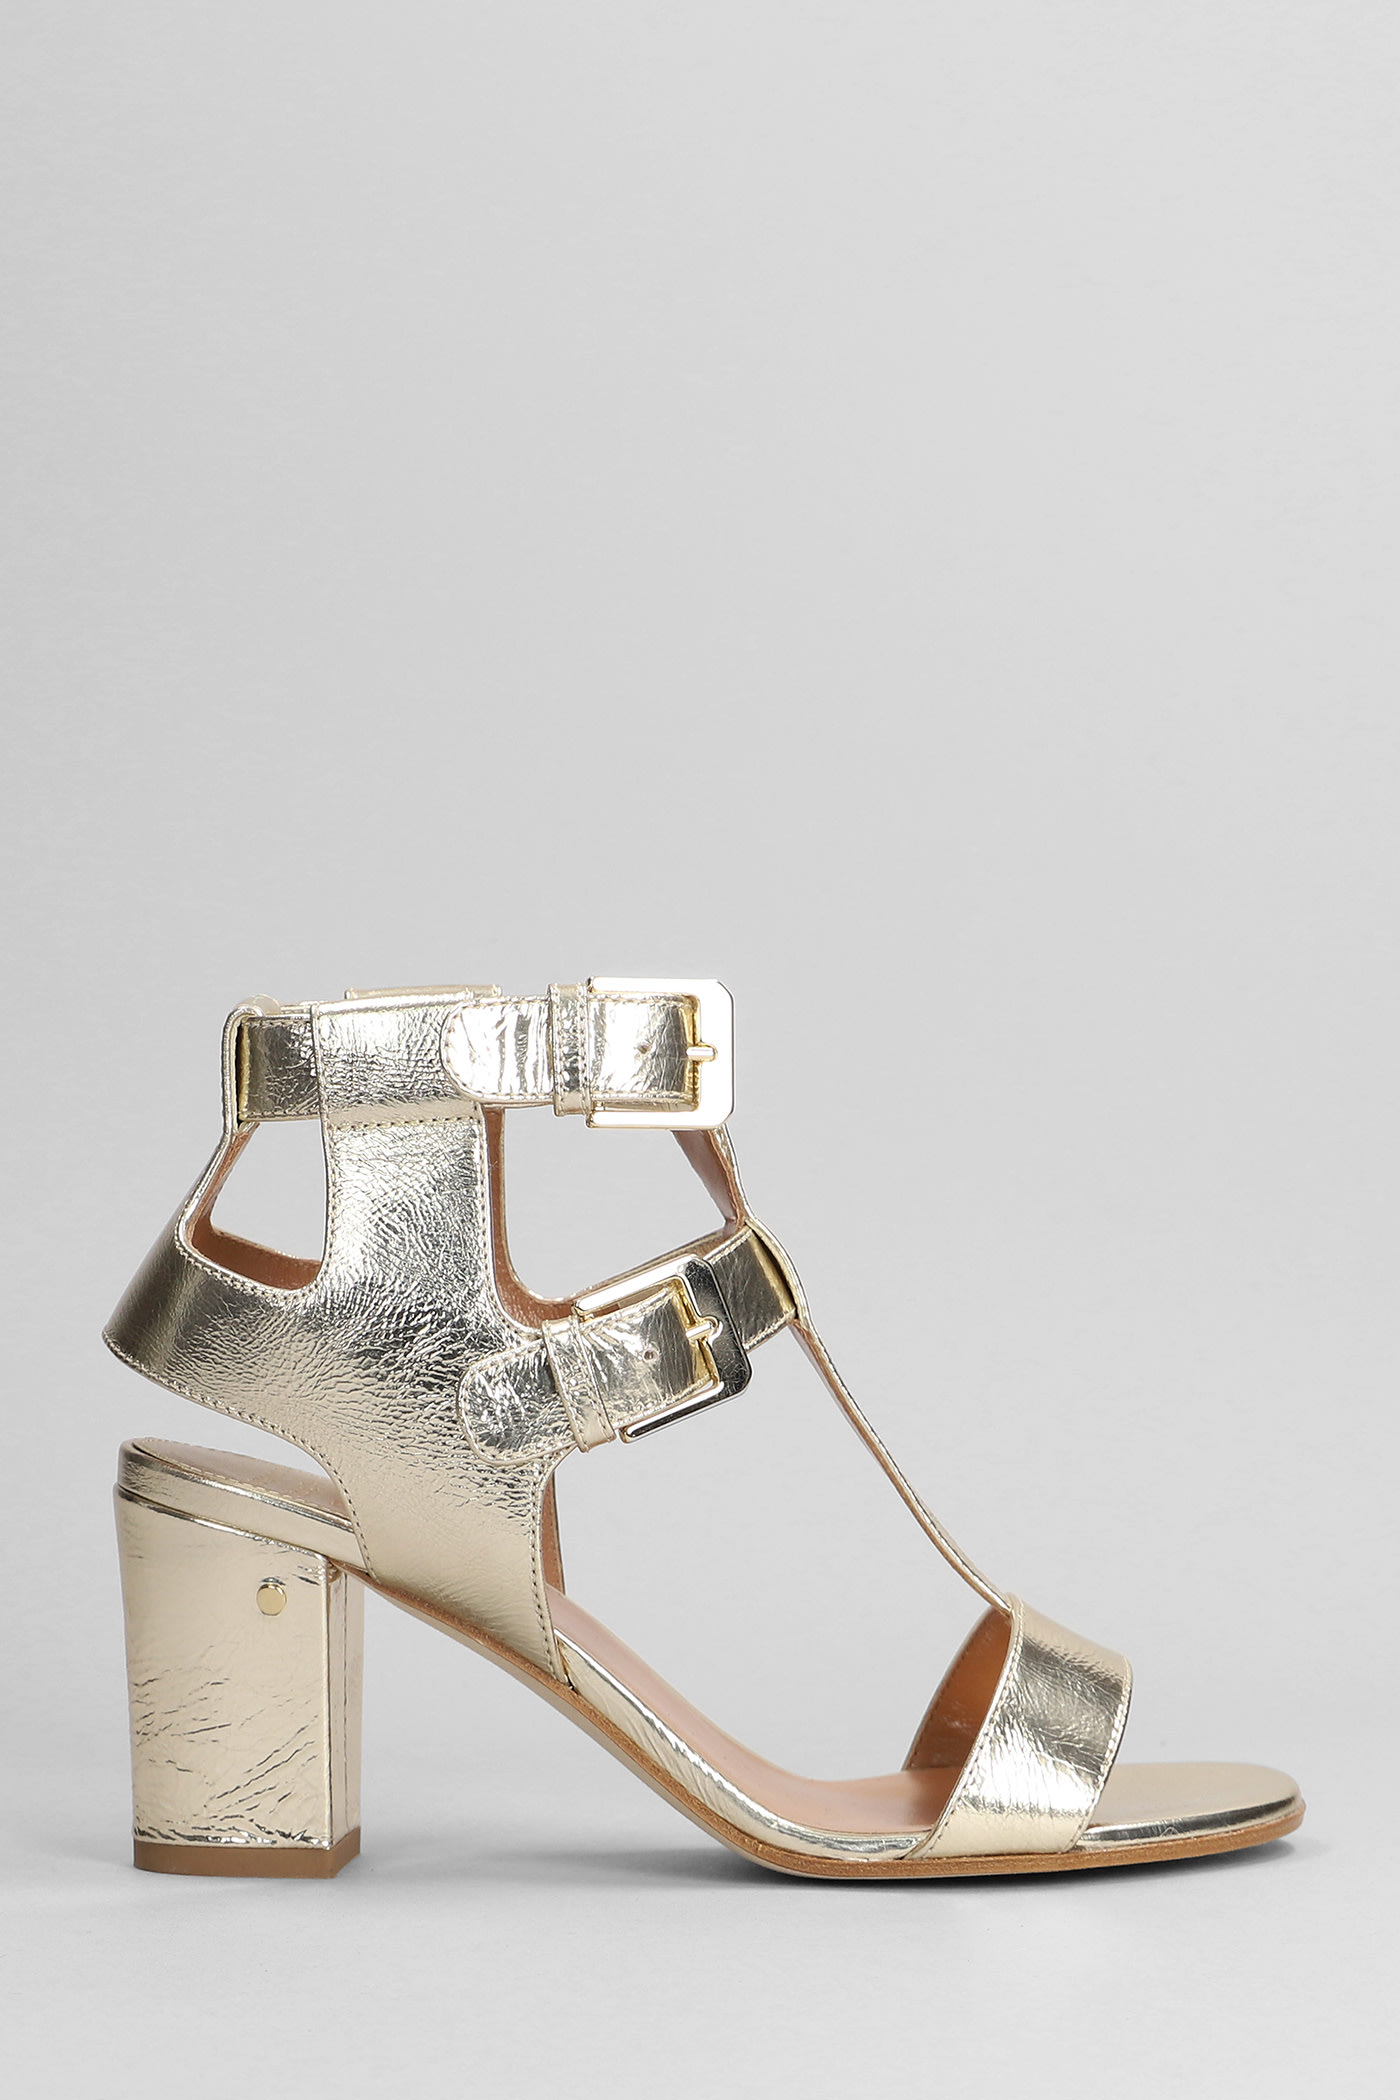 Laurence Dacade Helie Sandals In Platinum Leather